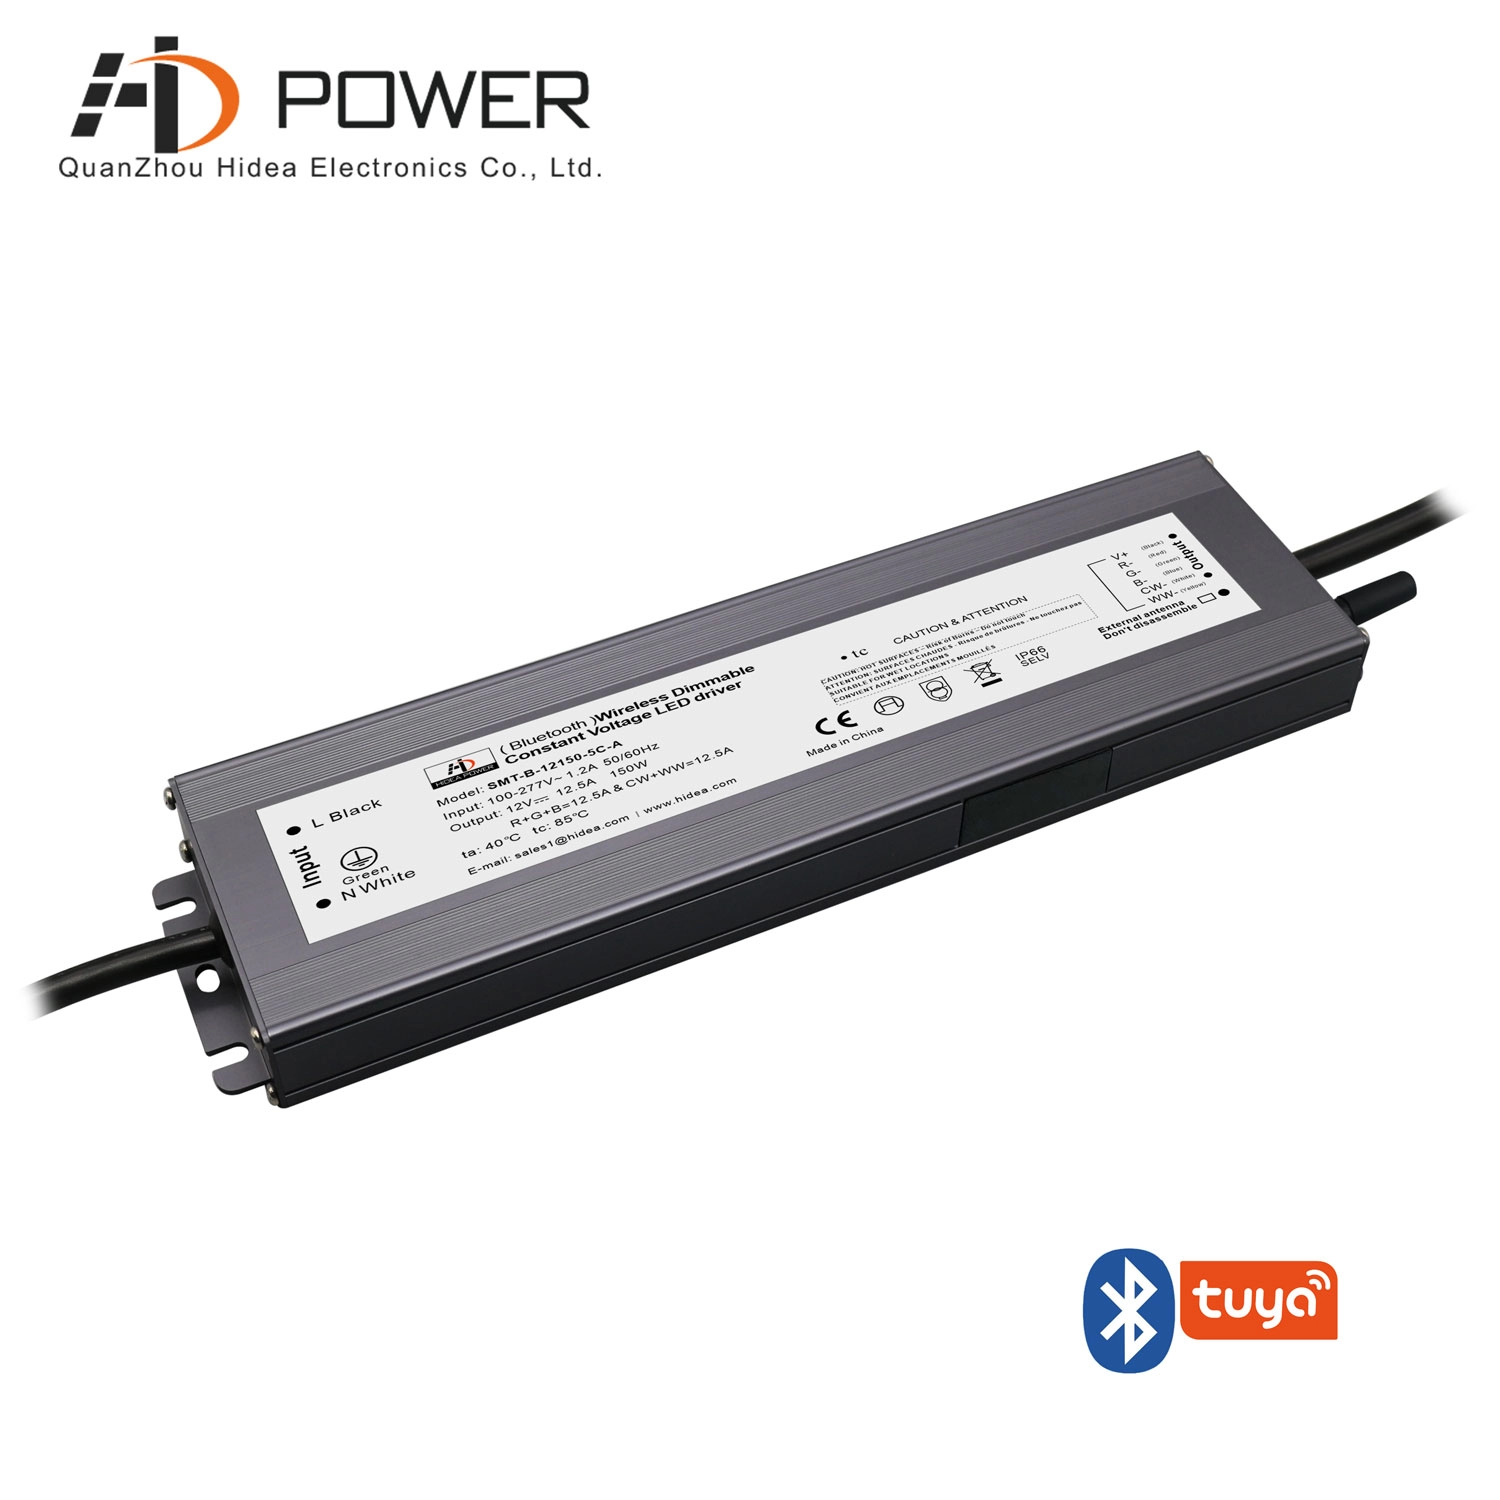 150w 12v 24v bluetooth dimmable led driver